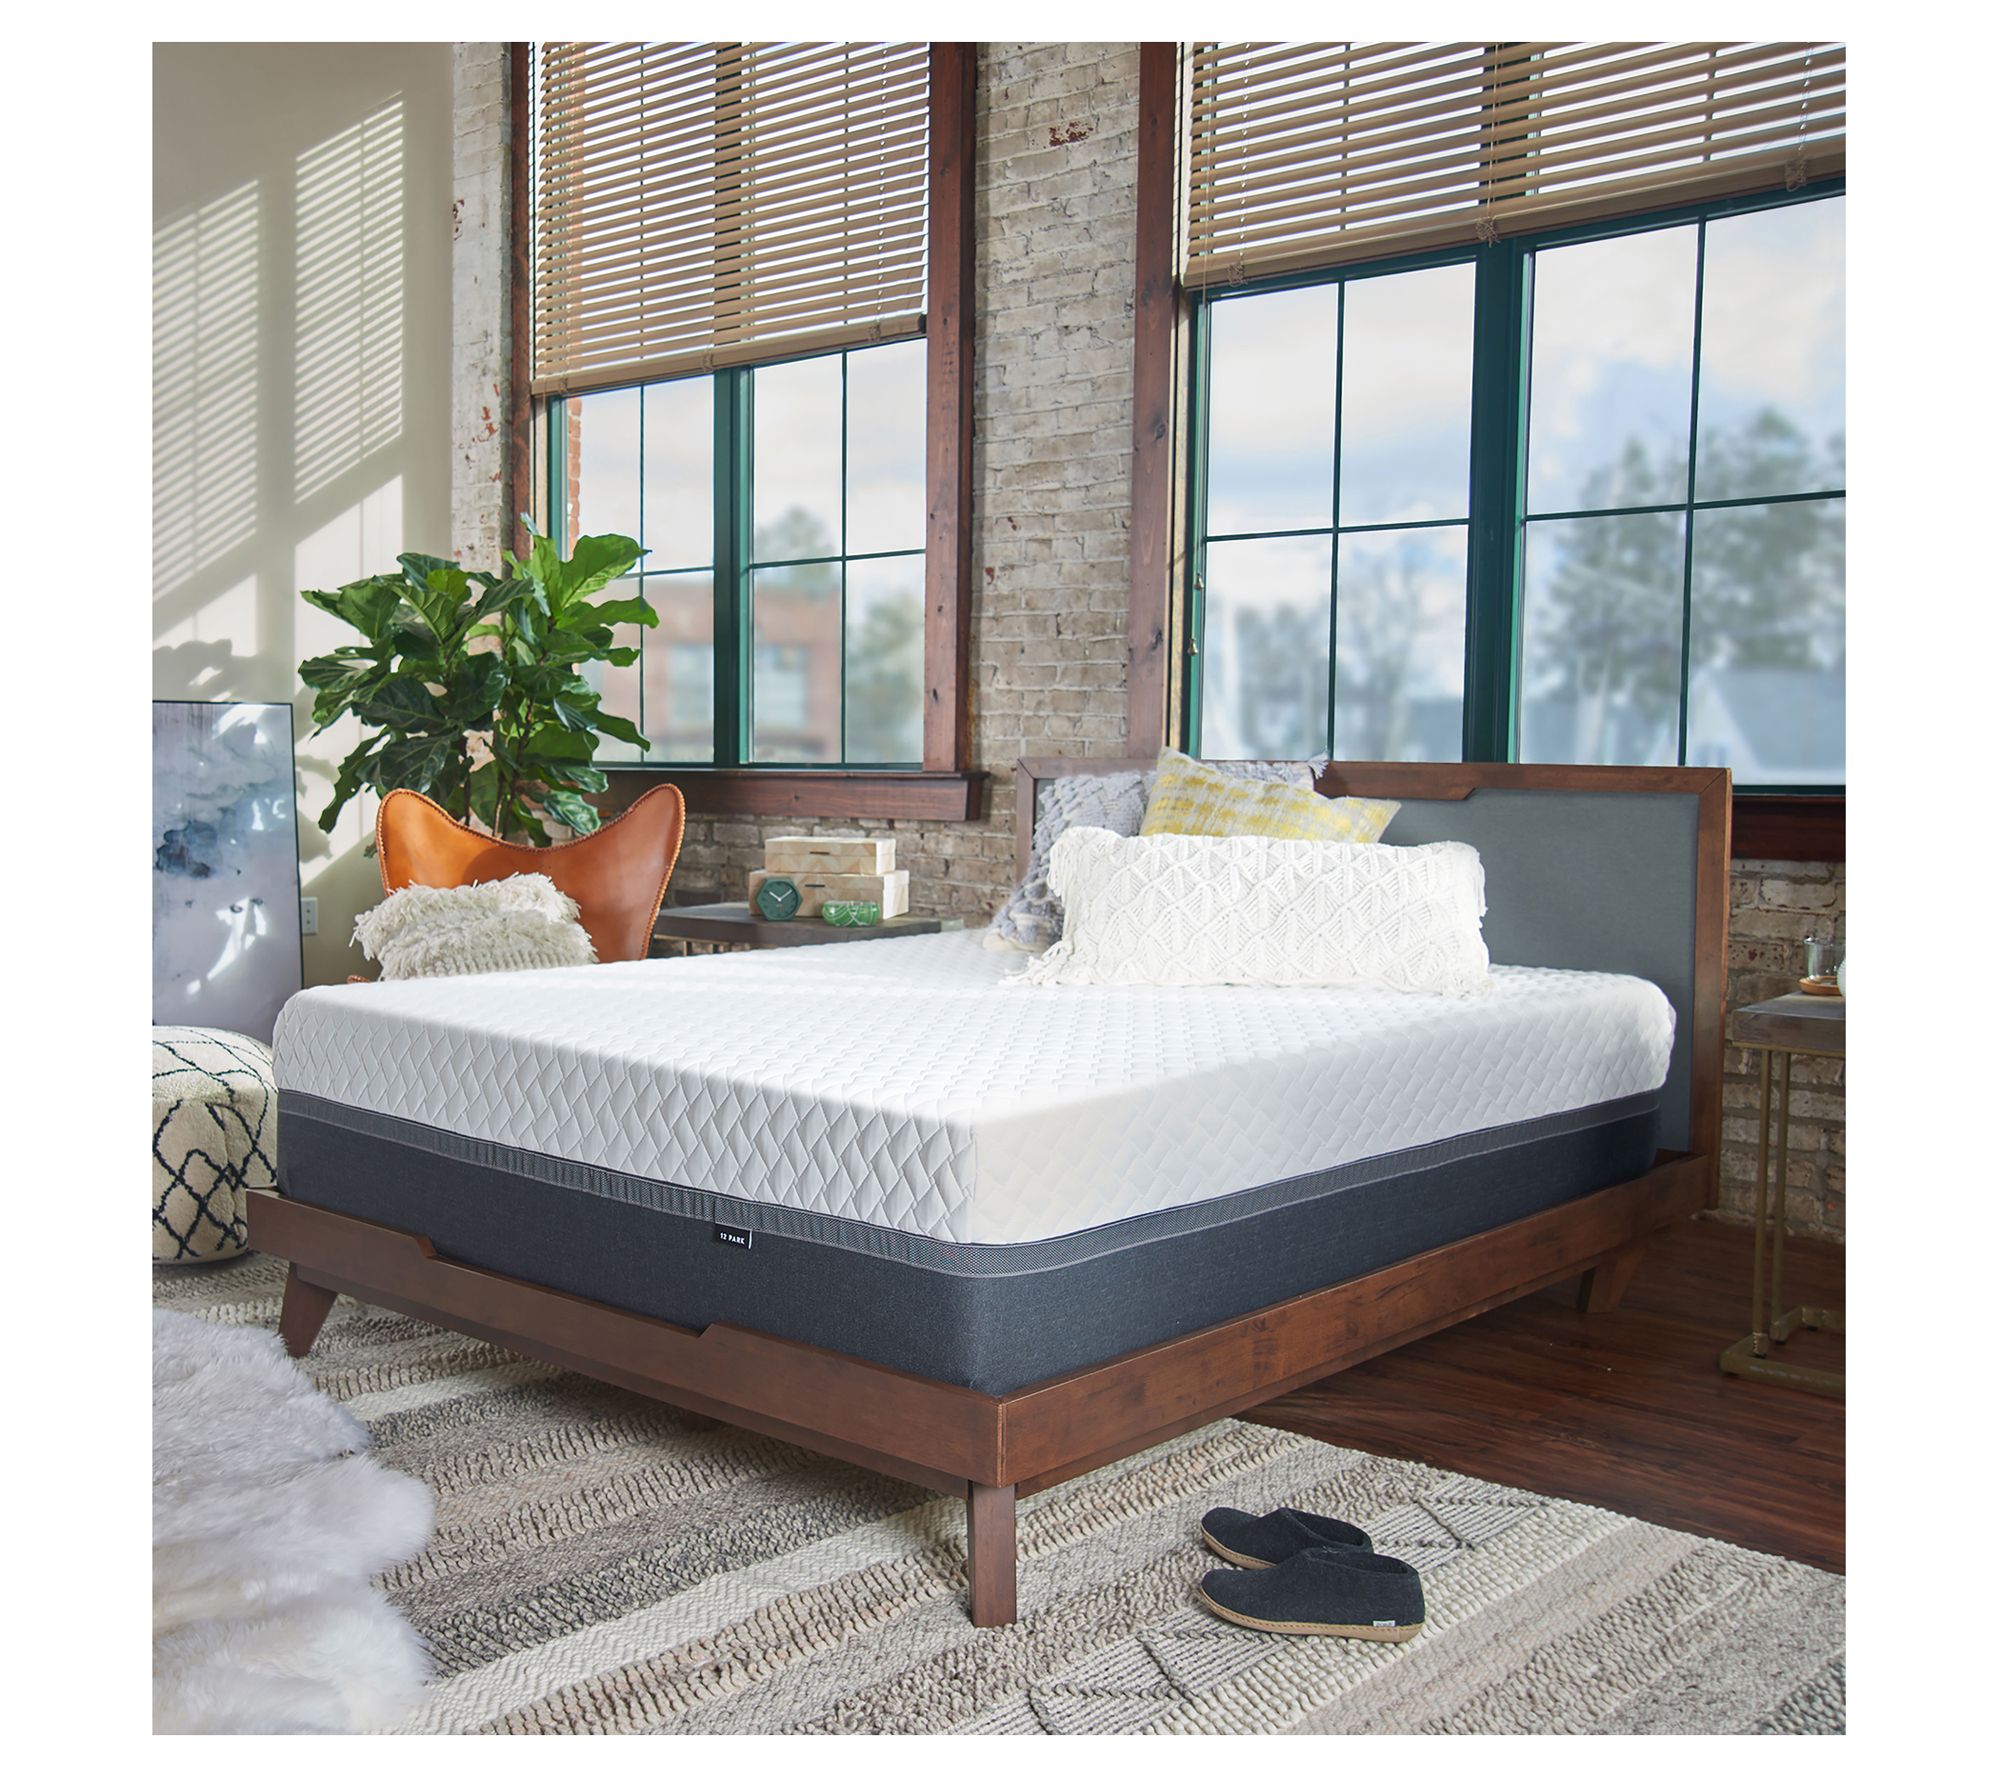 Sealy 12 Memory Foam Mattress-in-a-Box with Cool & Clean Cover - King